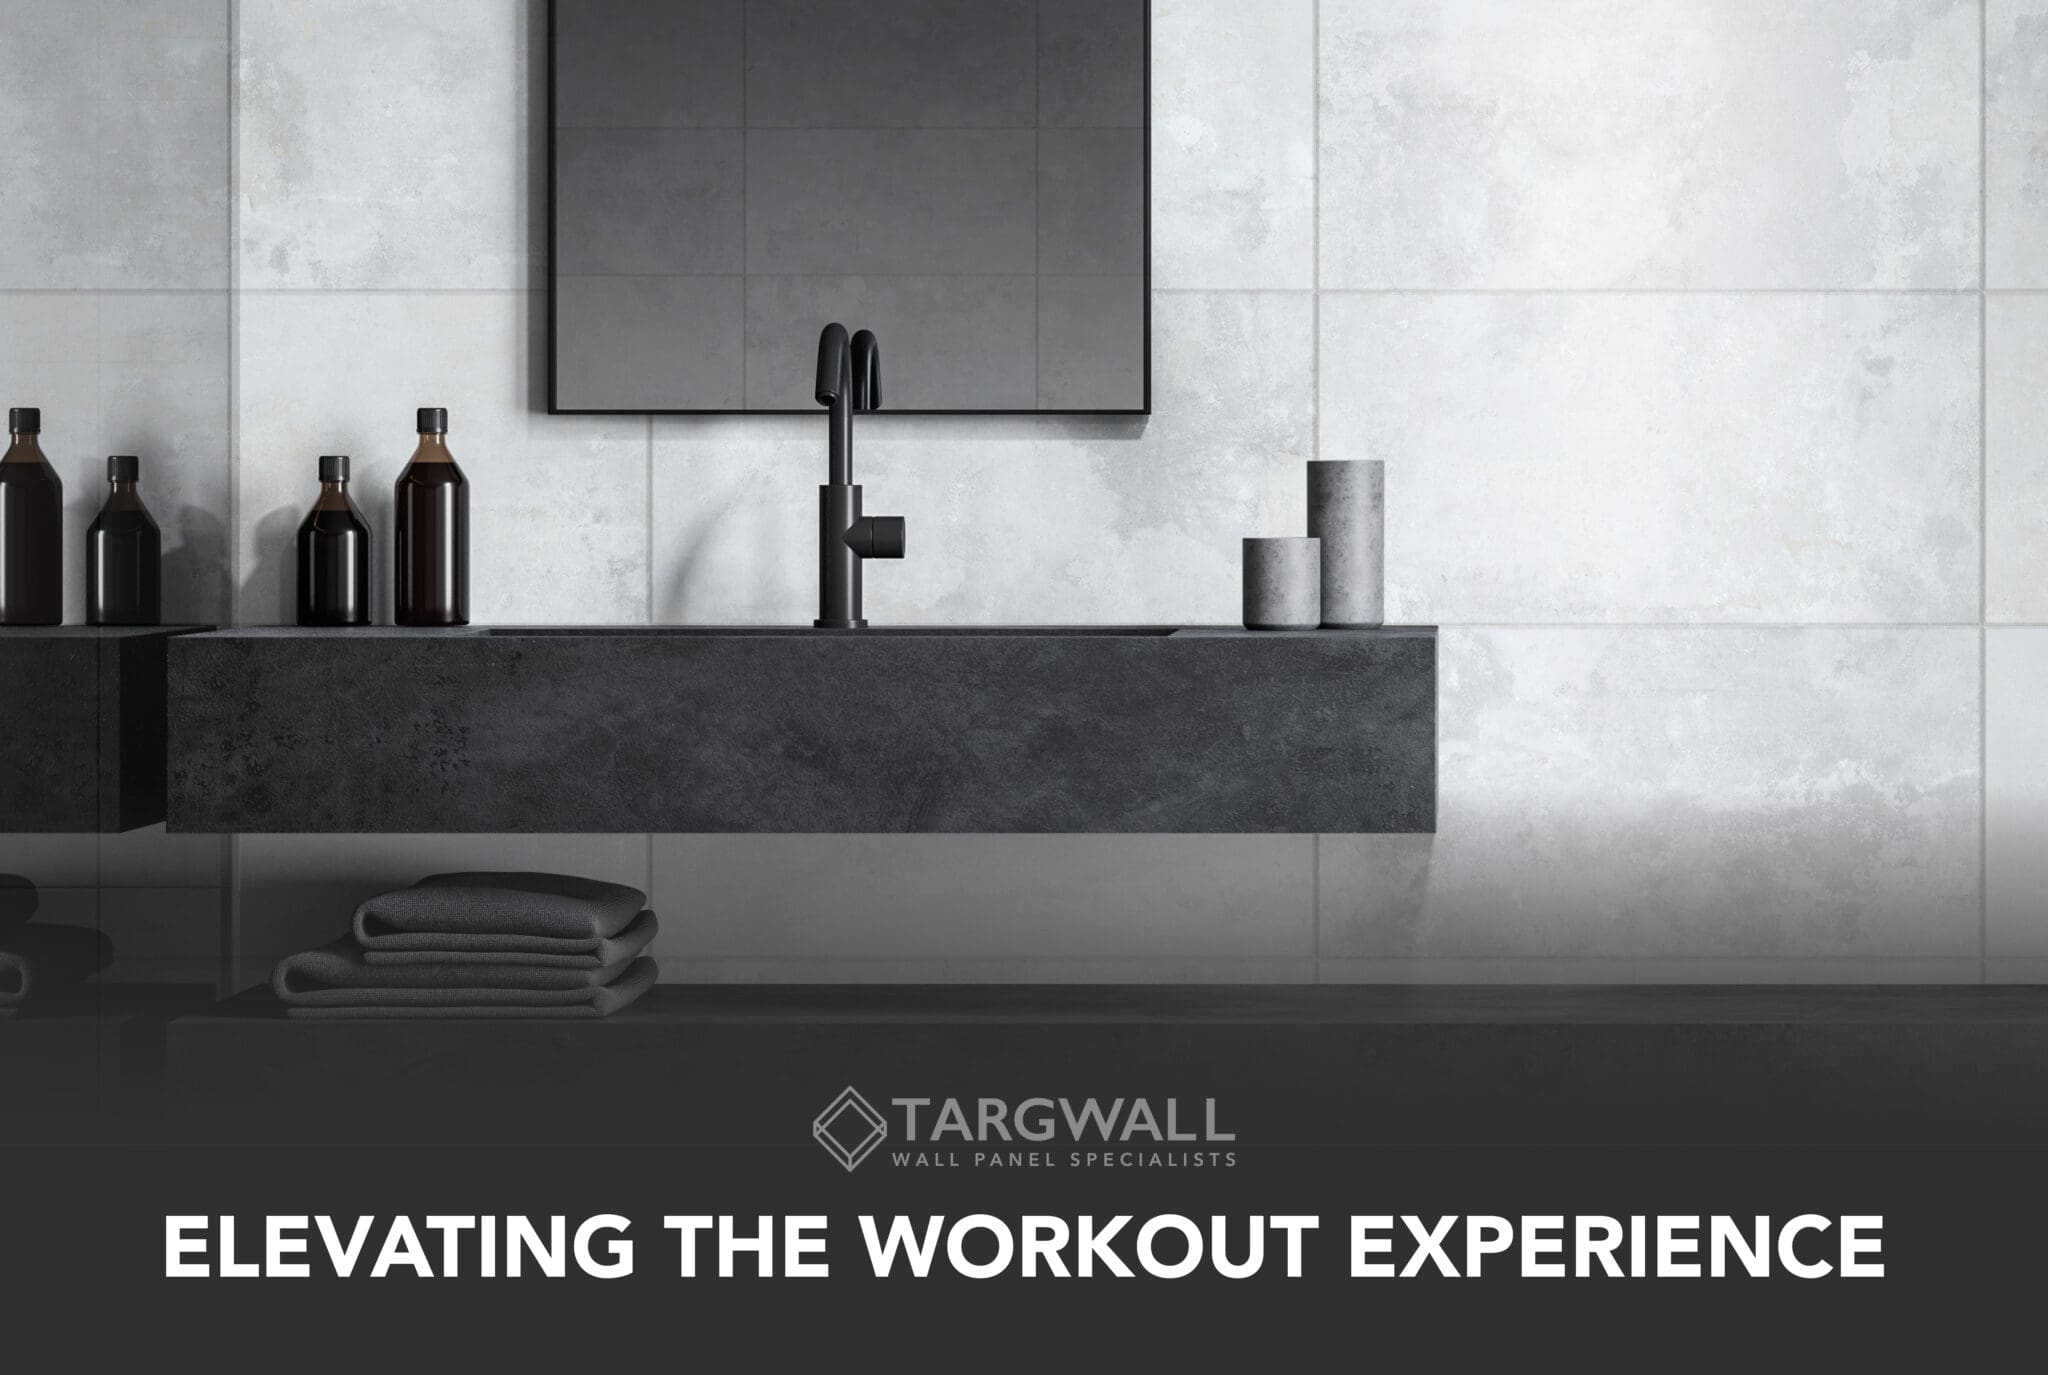 Elevating the Workout Experience: The Role of Wall Panels in Gyms